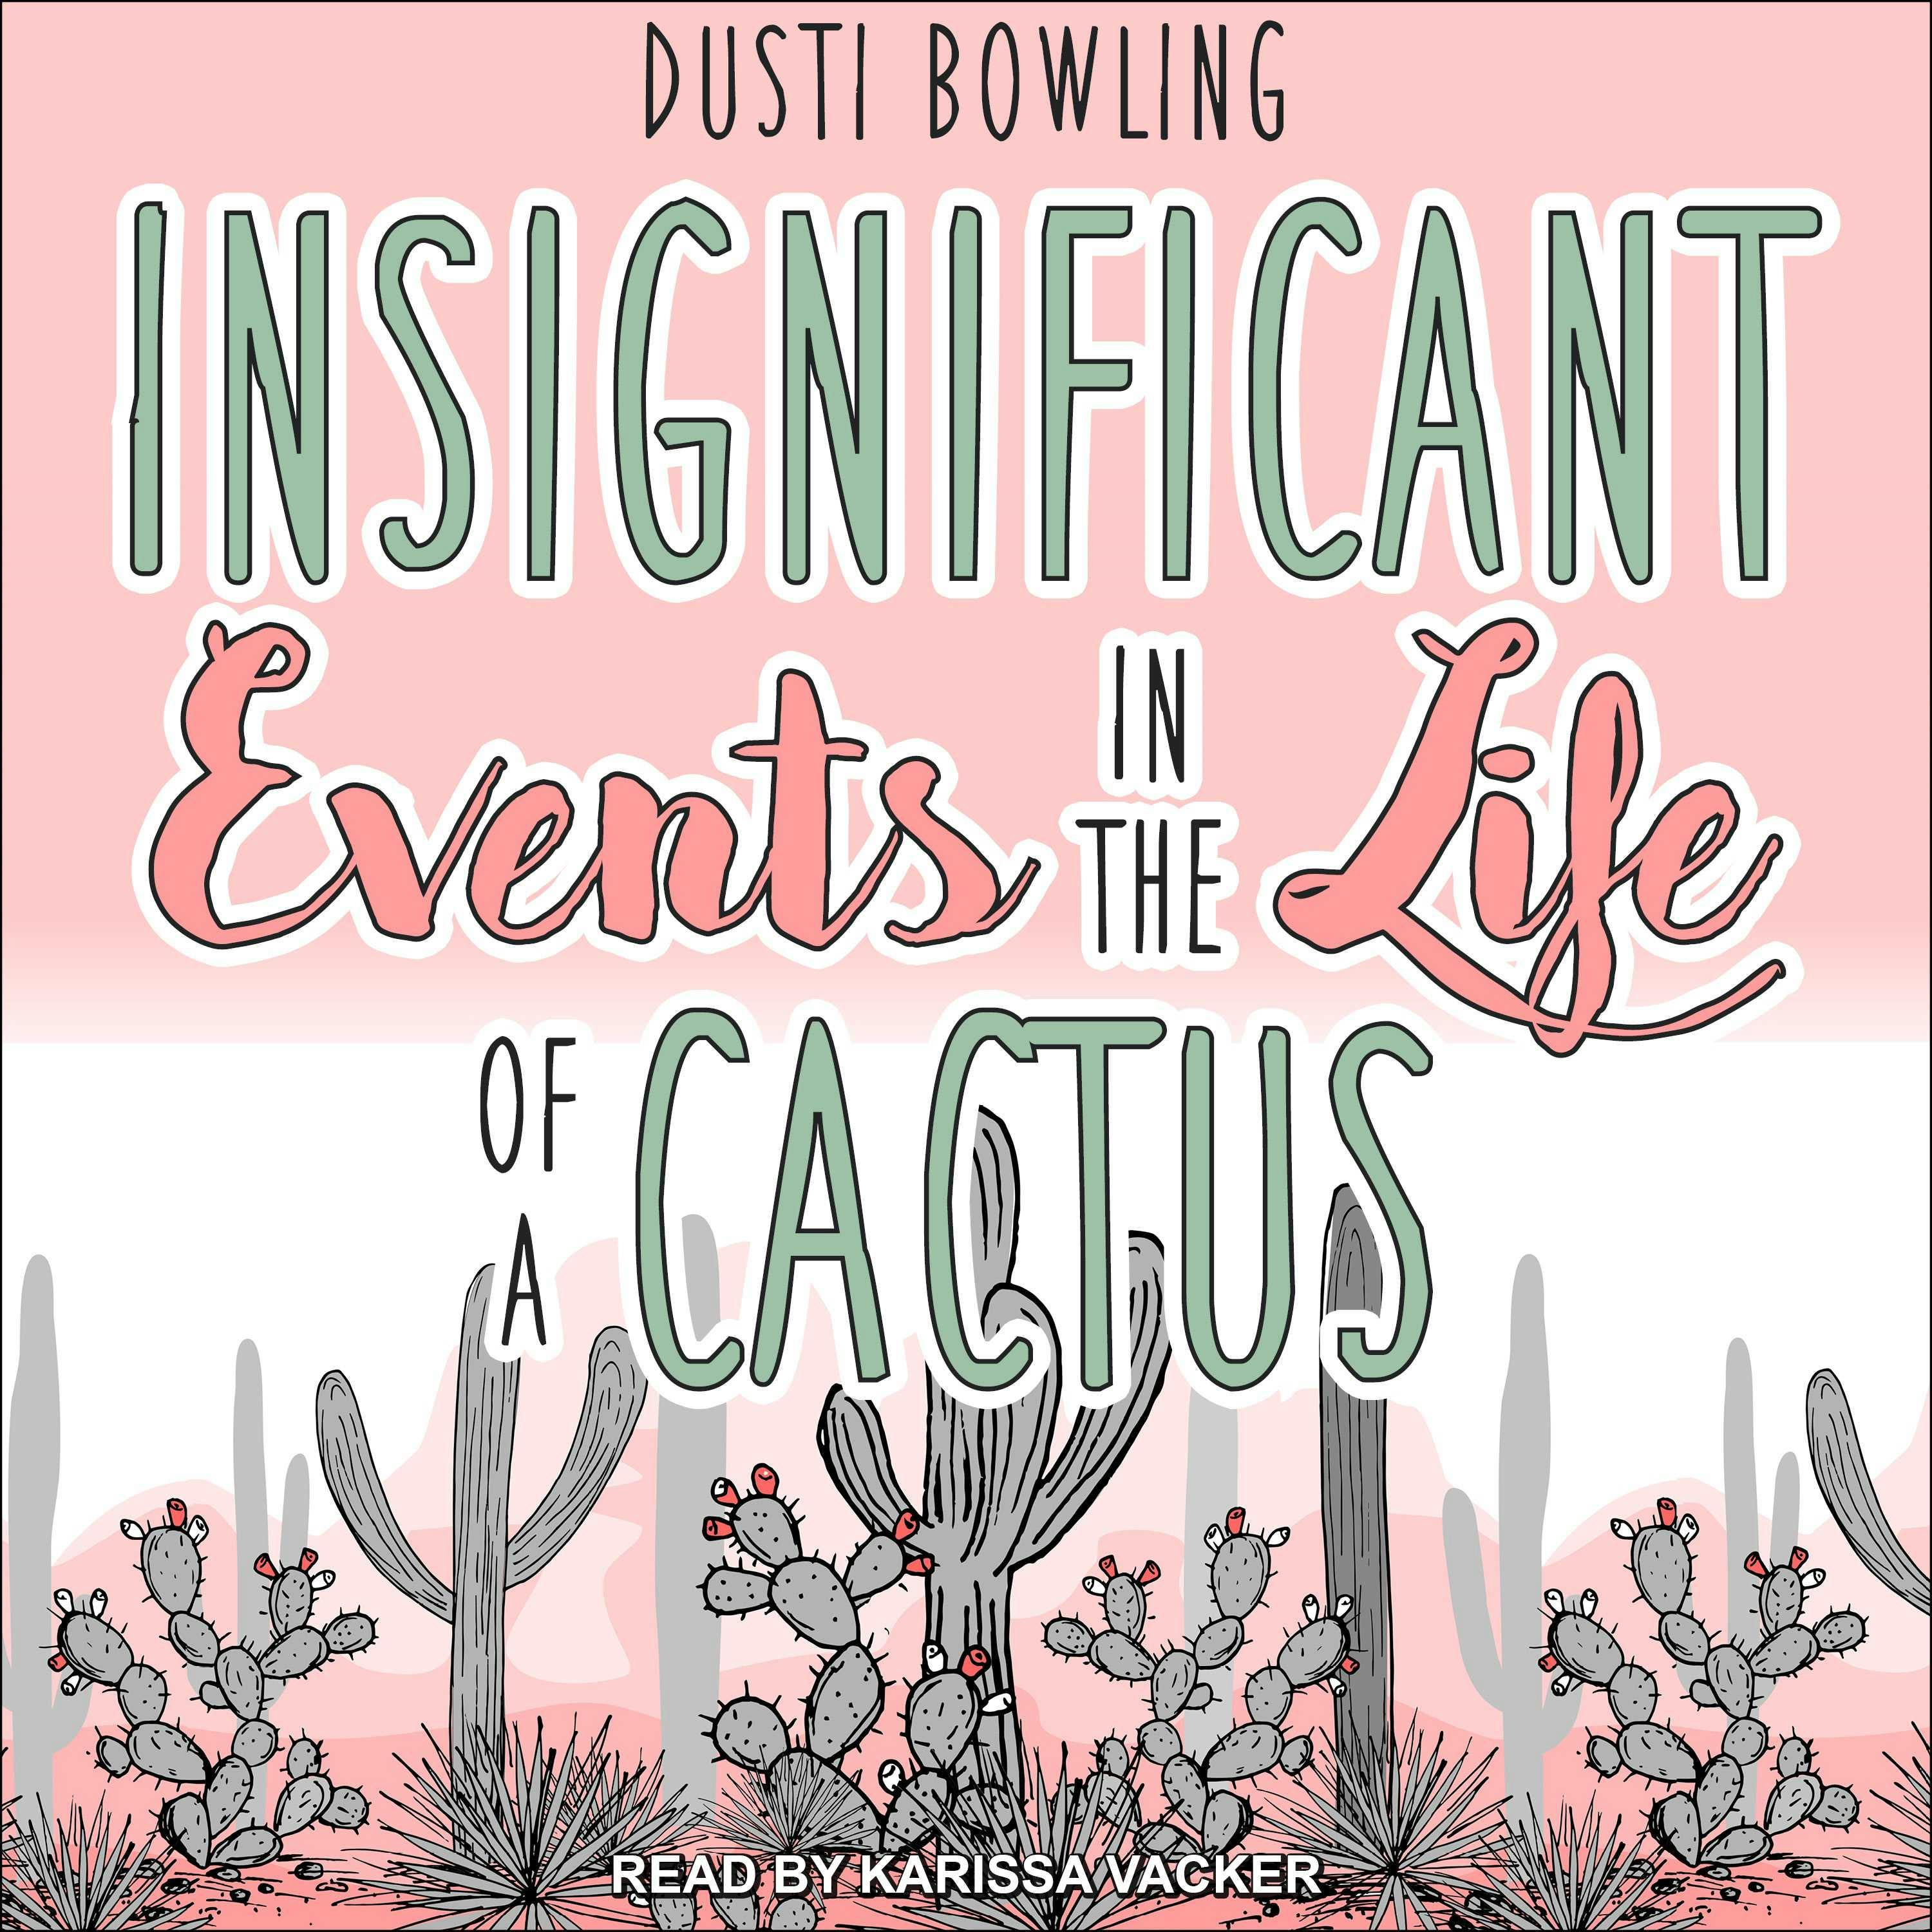 Insignificant Events in the Life of a Cactus - Dusti Bowling